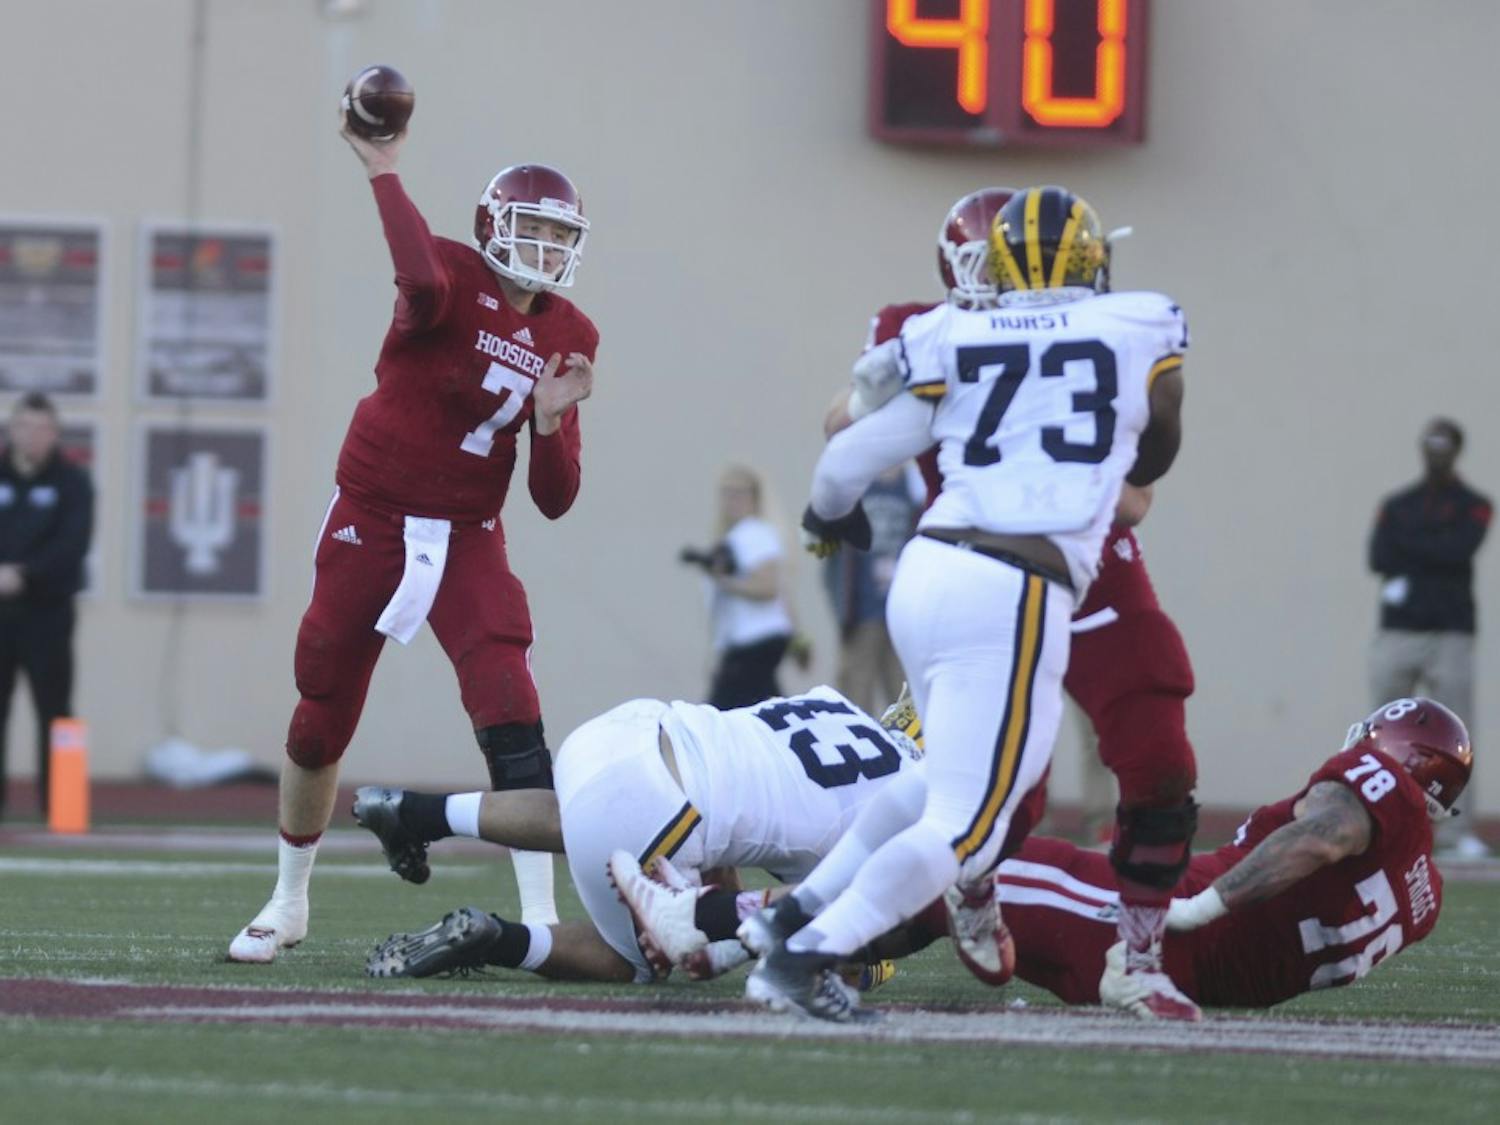 Quarterback Nate Sudfeld passes the ball during the against Michigan on Saturday at Memorial Stadium. The Hoosiers lost in double overtime, 41-48.